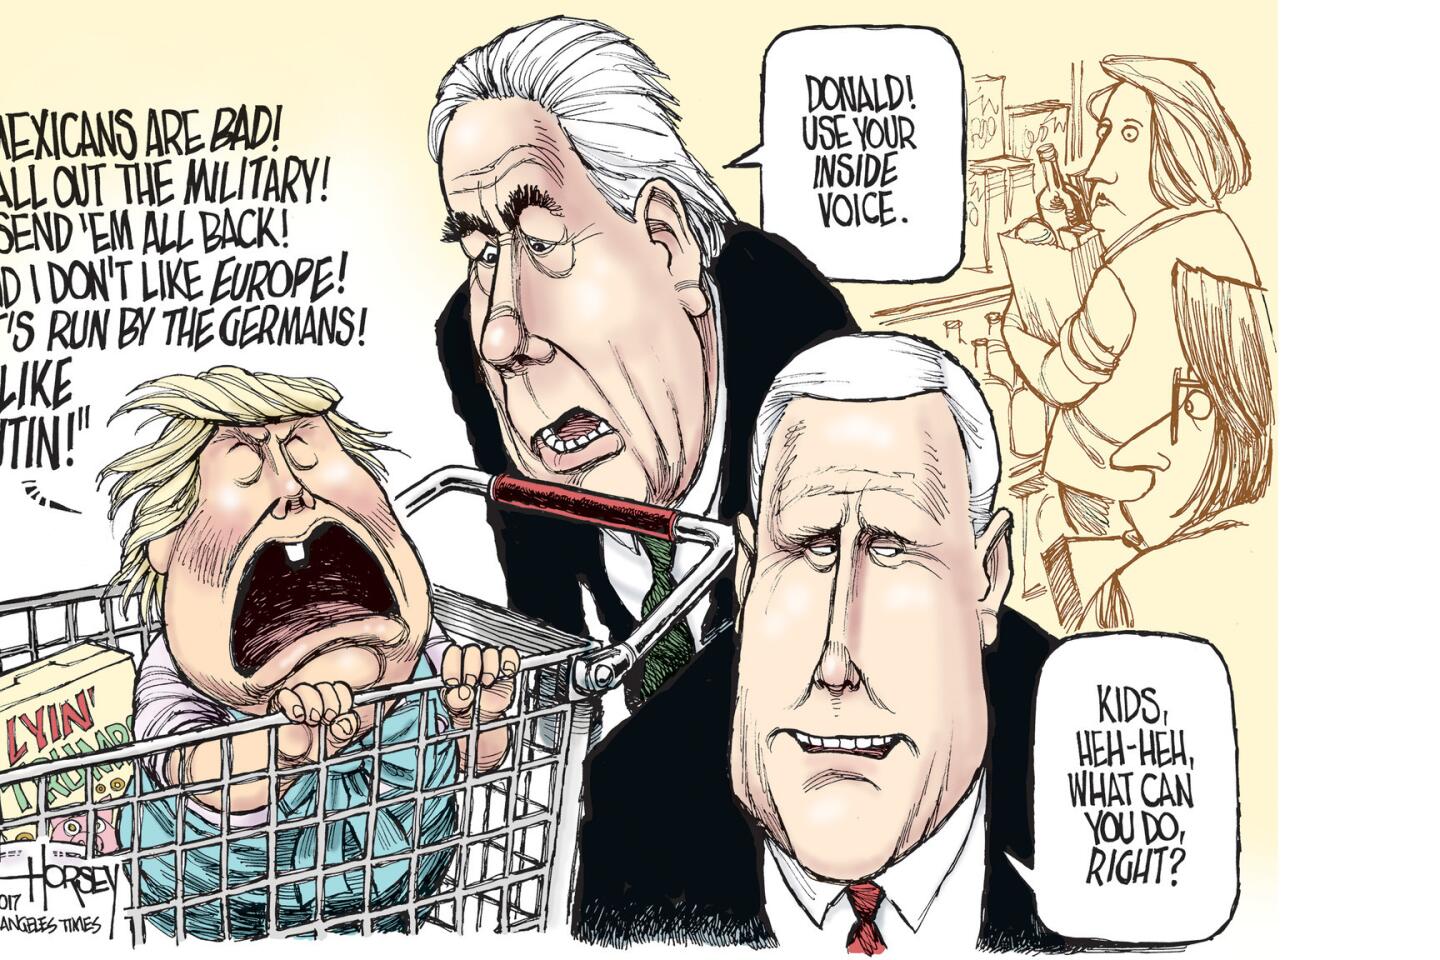 Tillerson and Pence try to quiet Trump's brash outbursts.